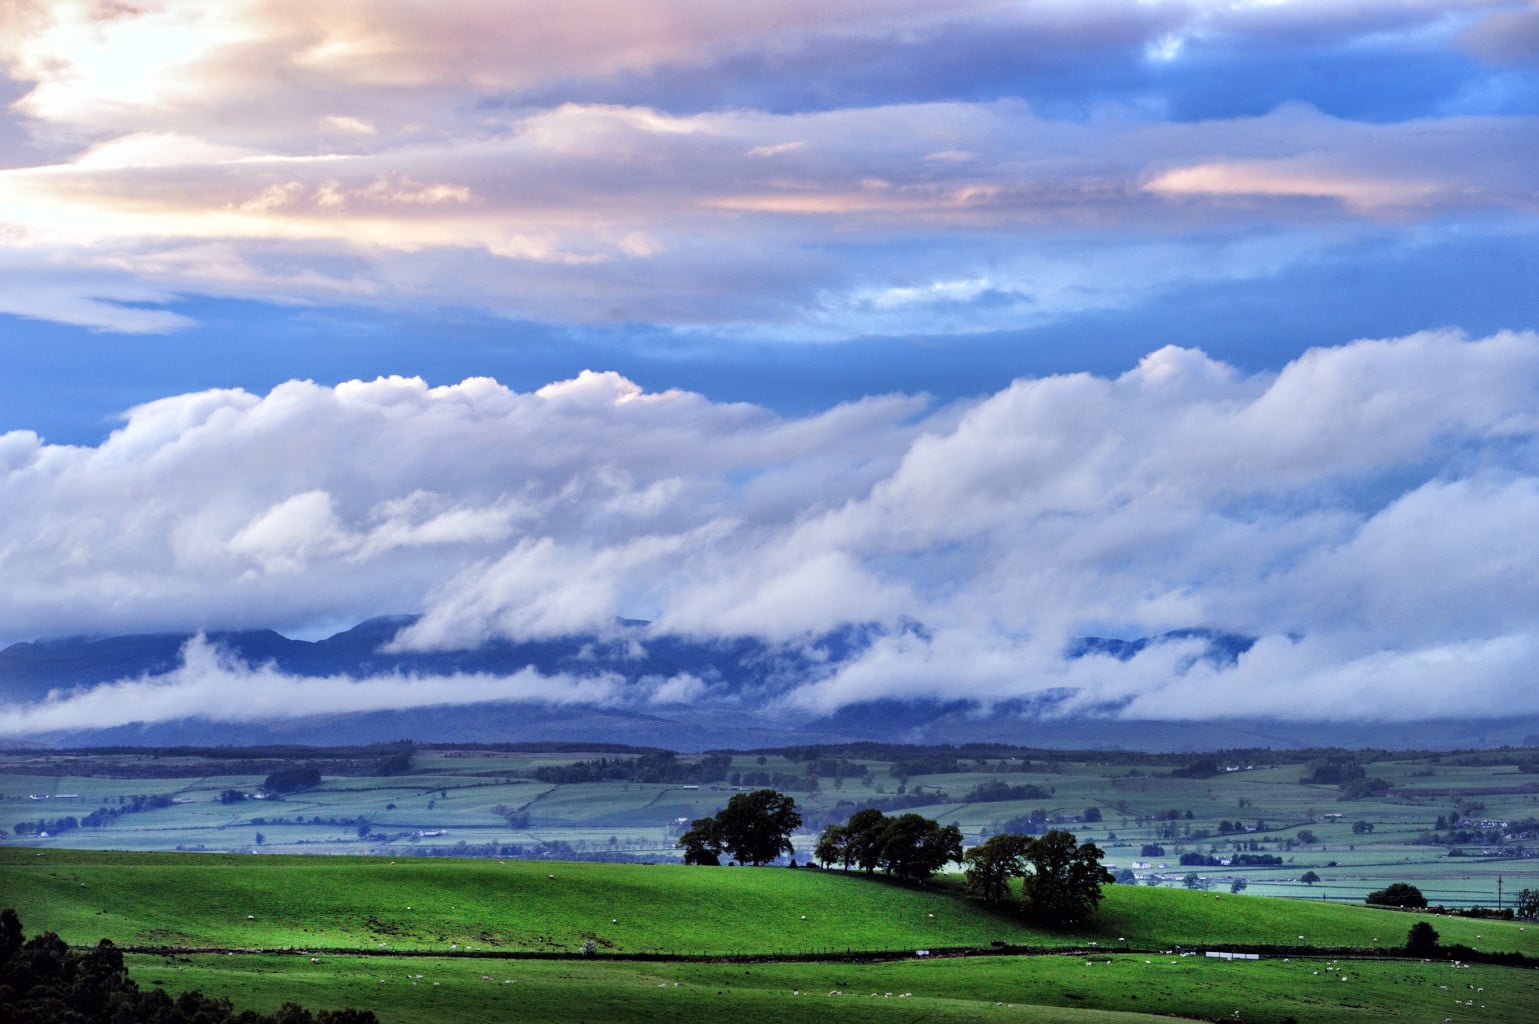 Clouds over the mountains and hills of the Trossachs, Scotland